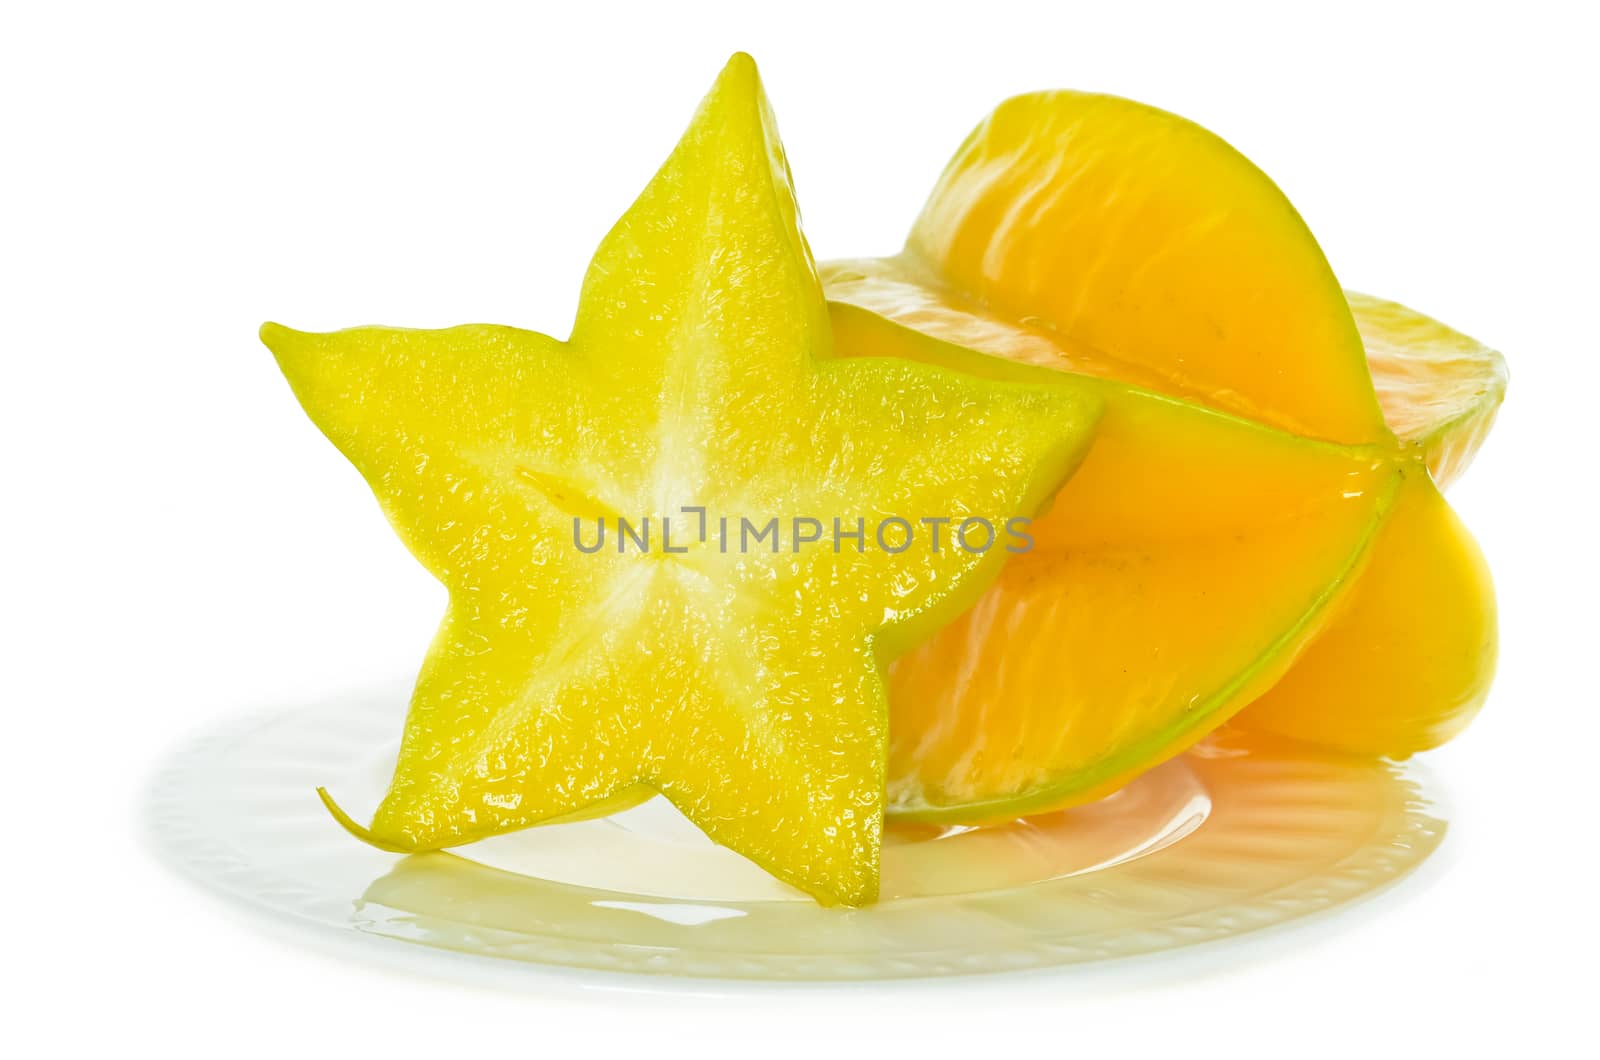 The star fruit is rich in juice. by raweenuttapong